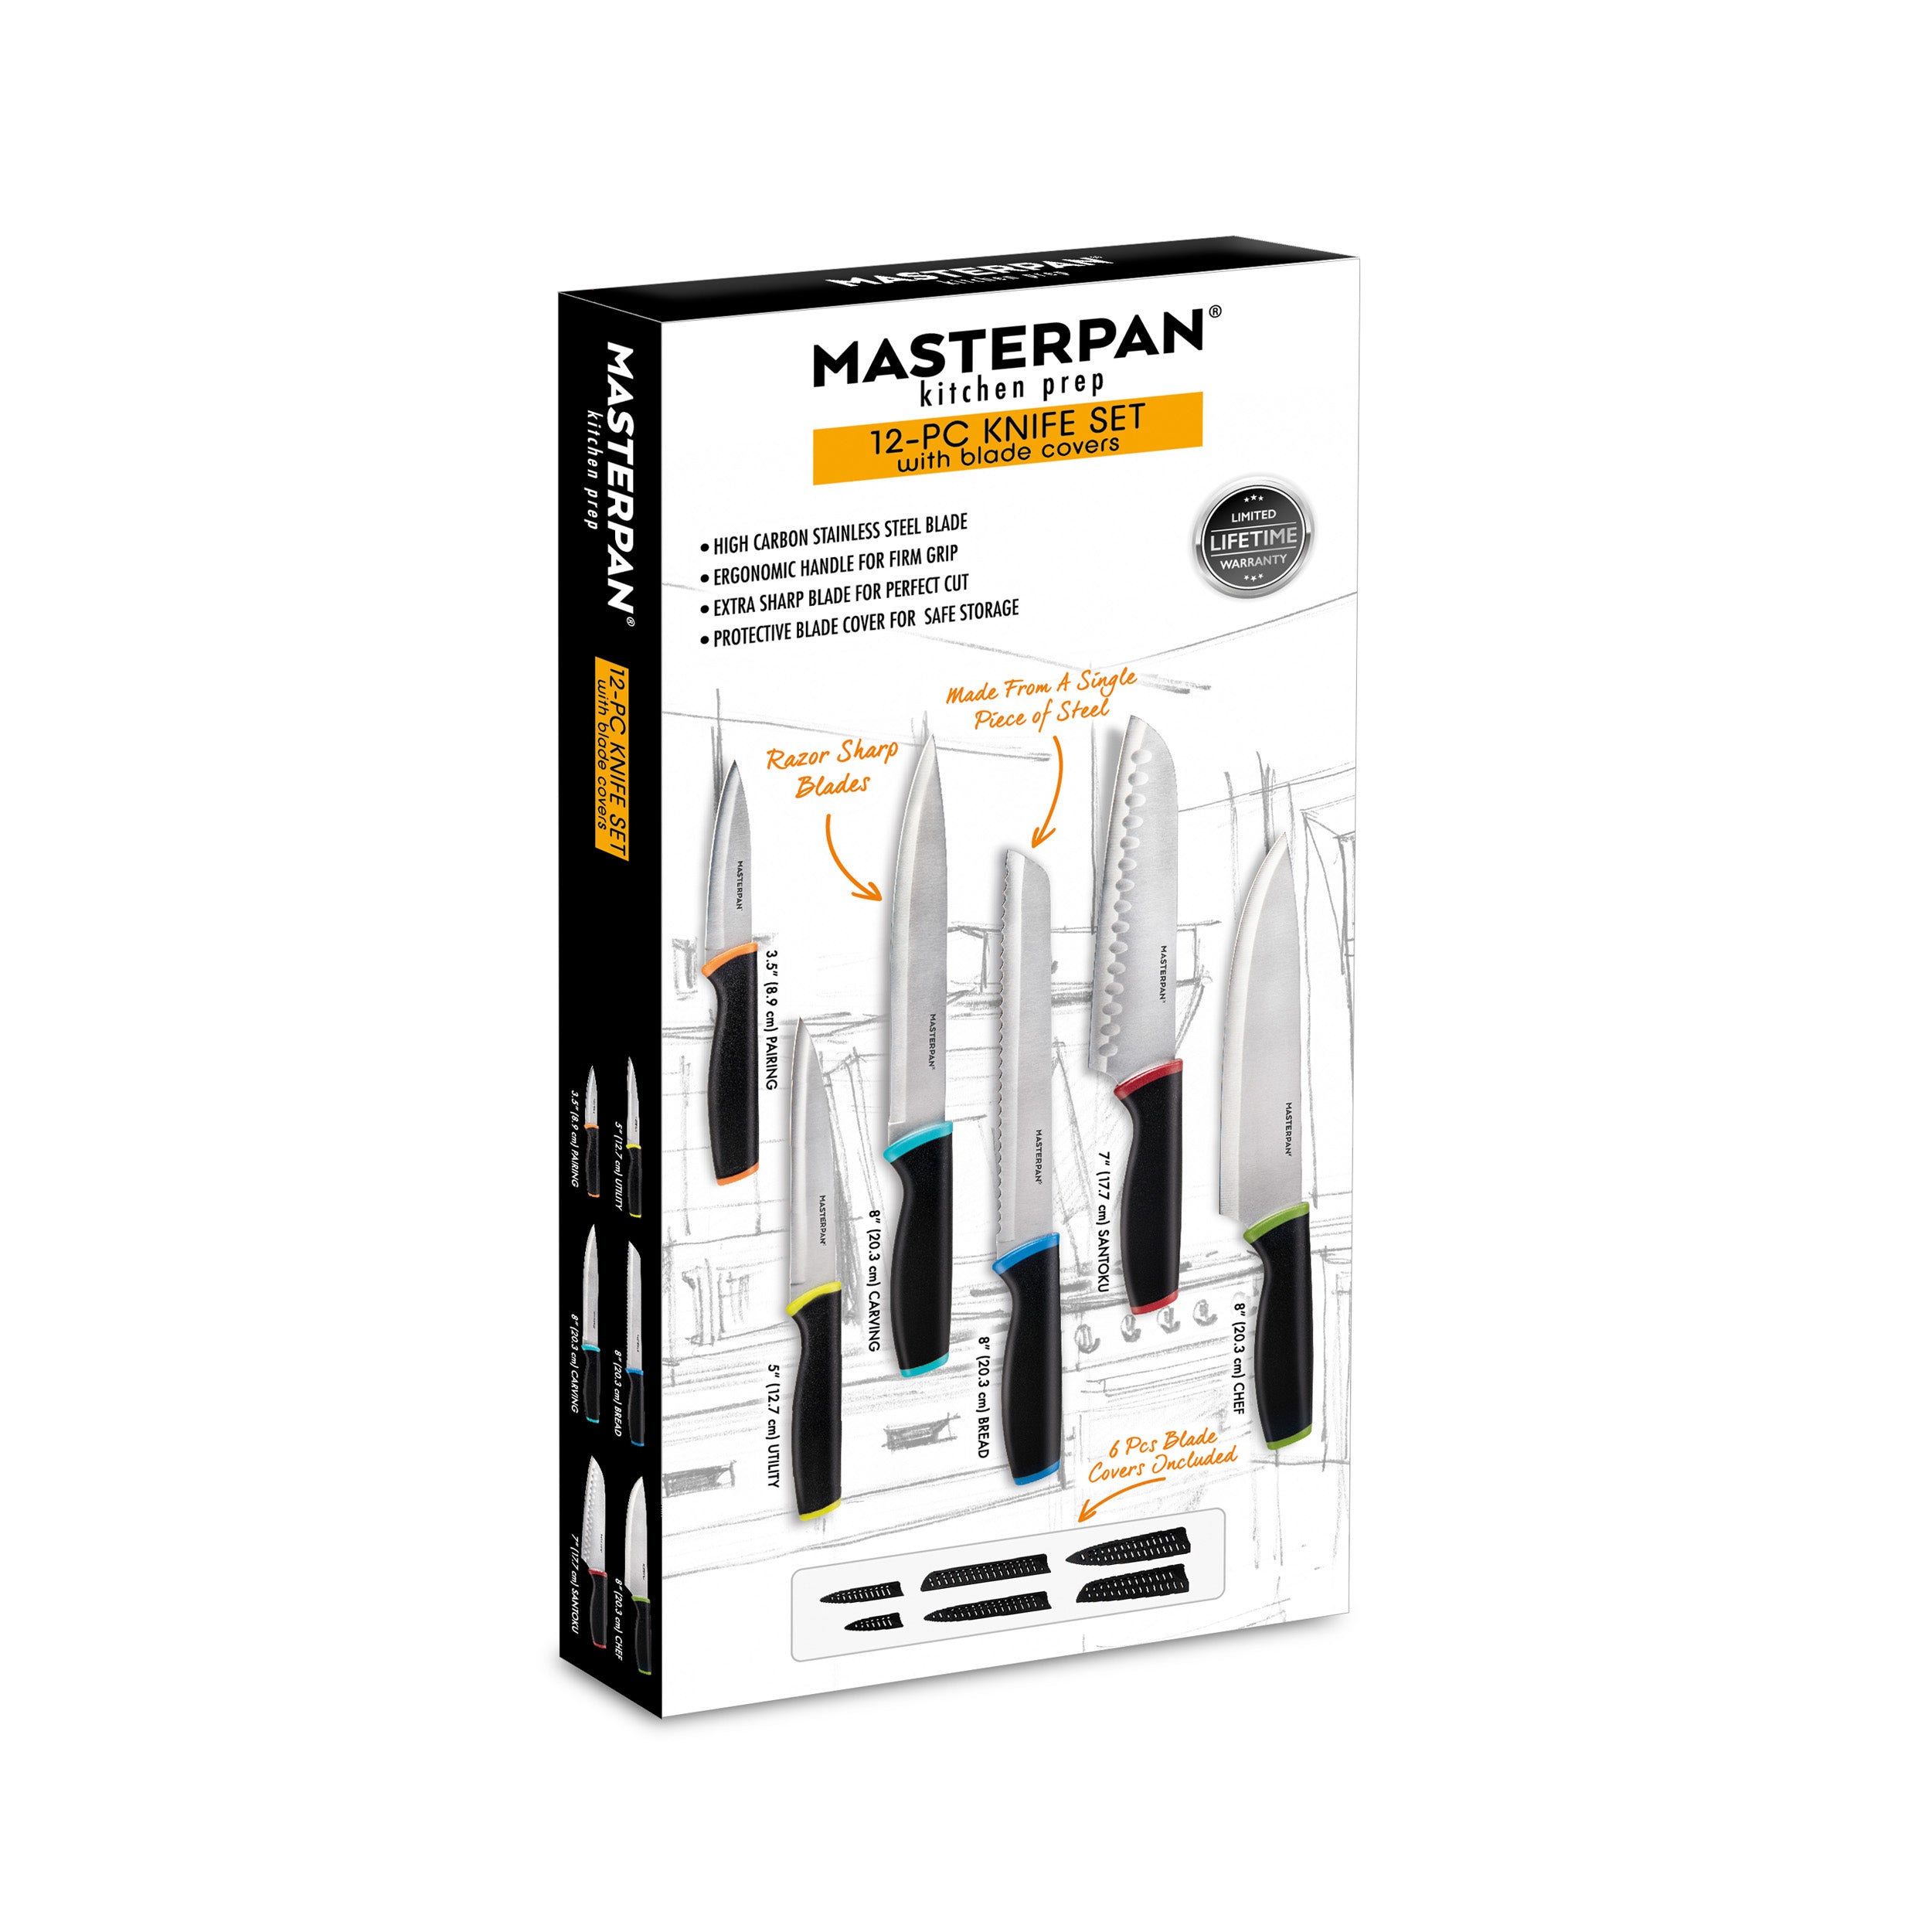 MASTERPAN Knife Set with Covers, 12-pc